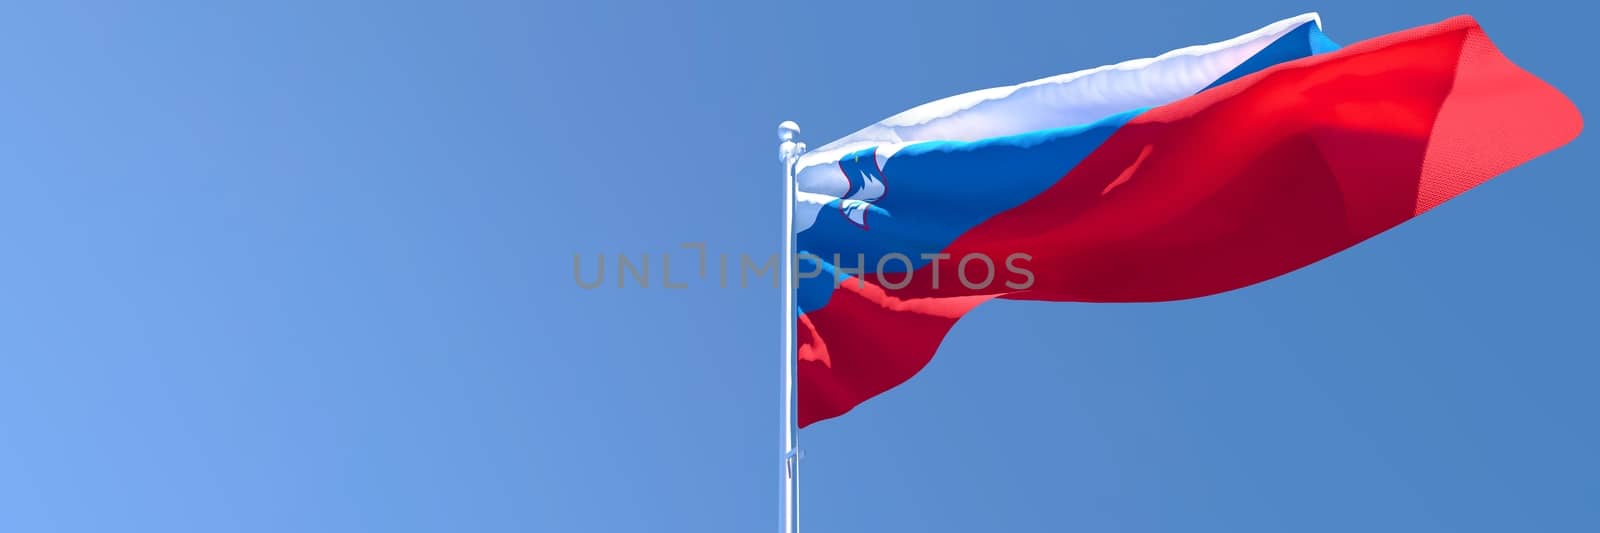 3D rendering of the national flag of Slovenia waving in the wind against a blue sky